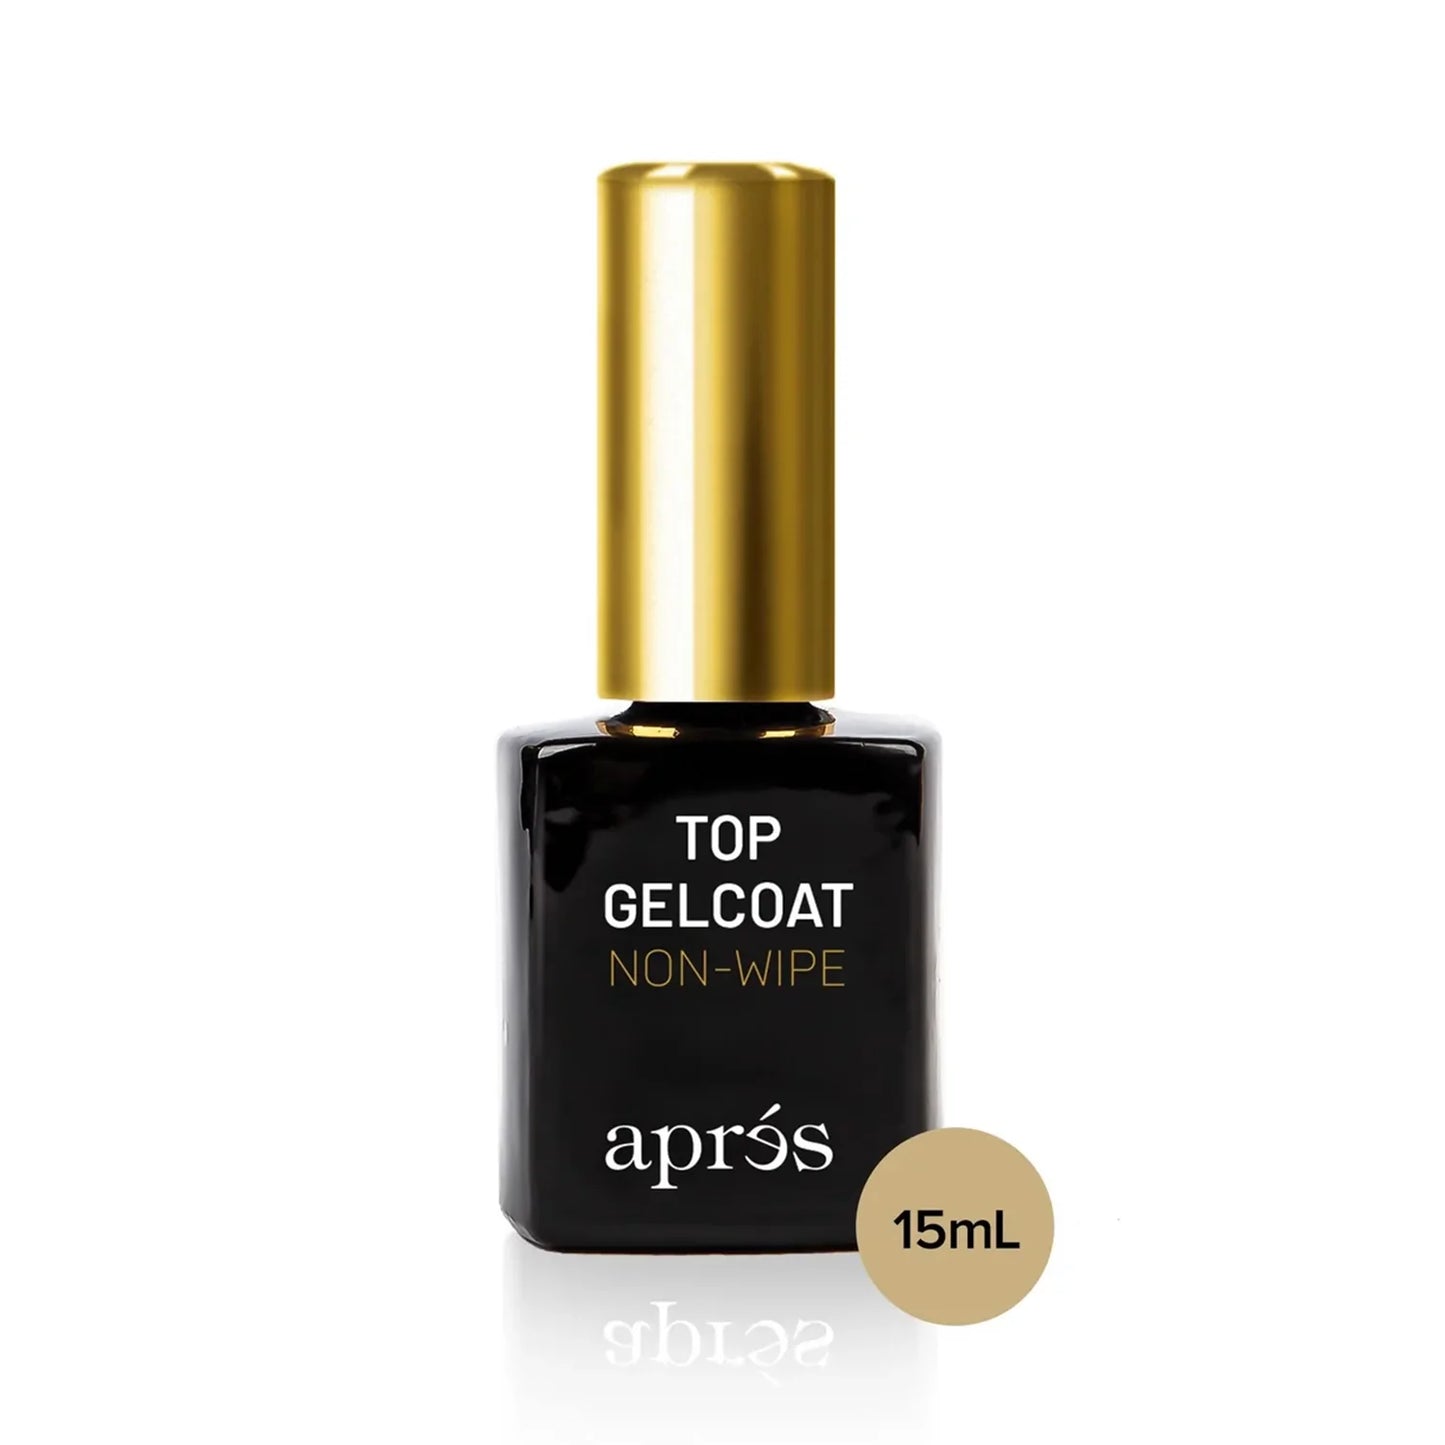 Non-Wipe Glossy Top Gelcoat